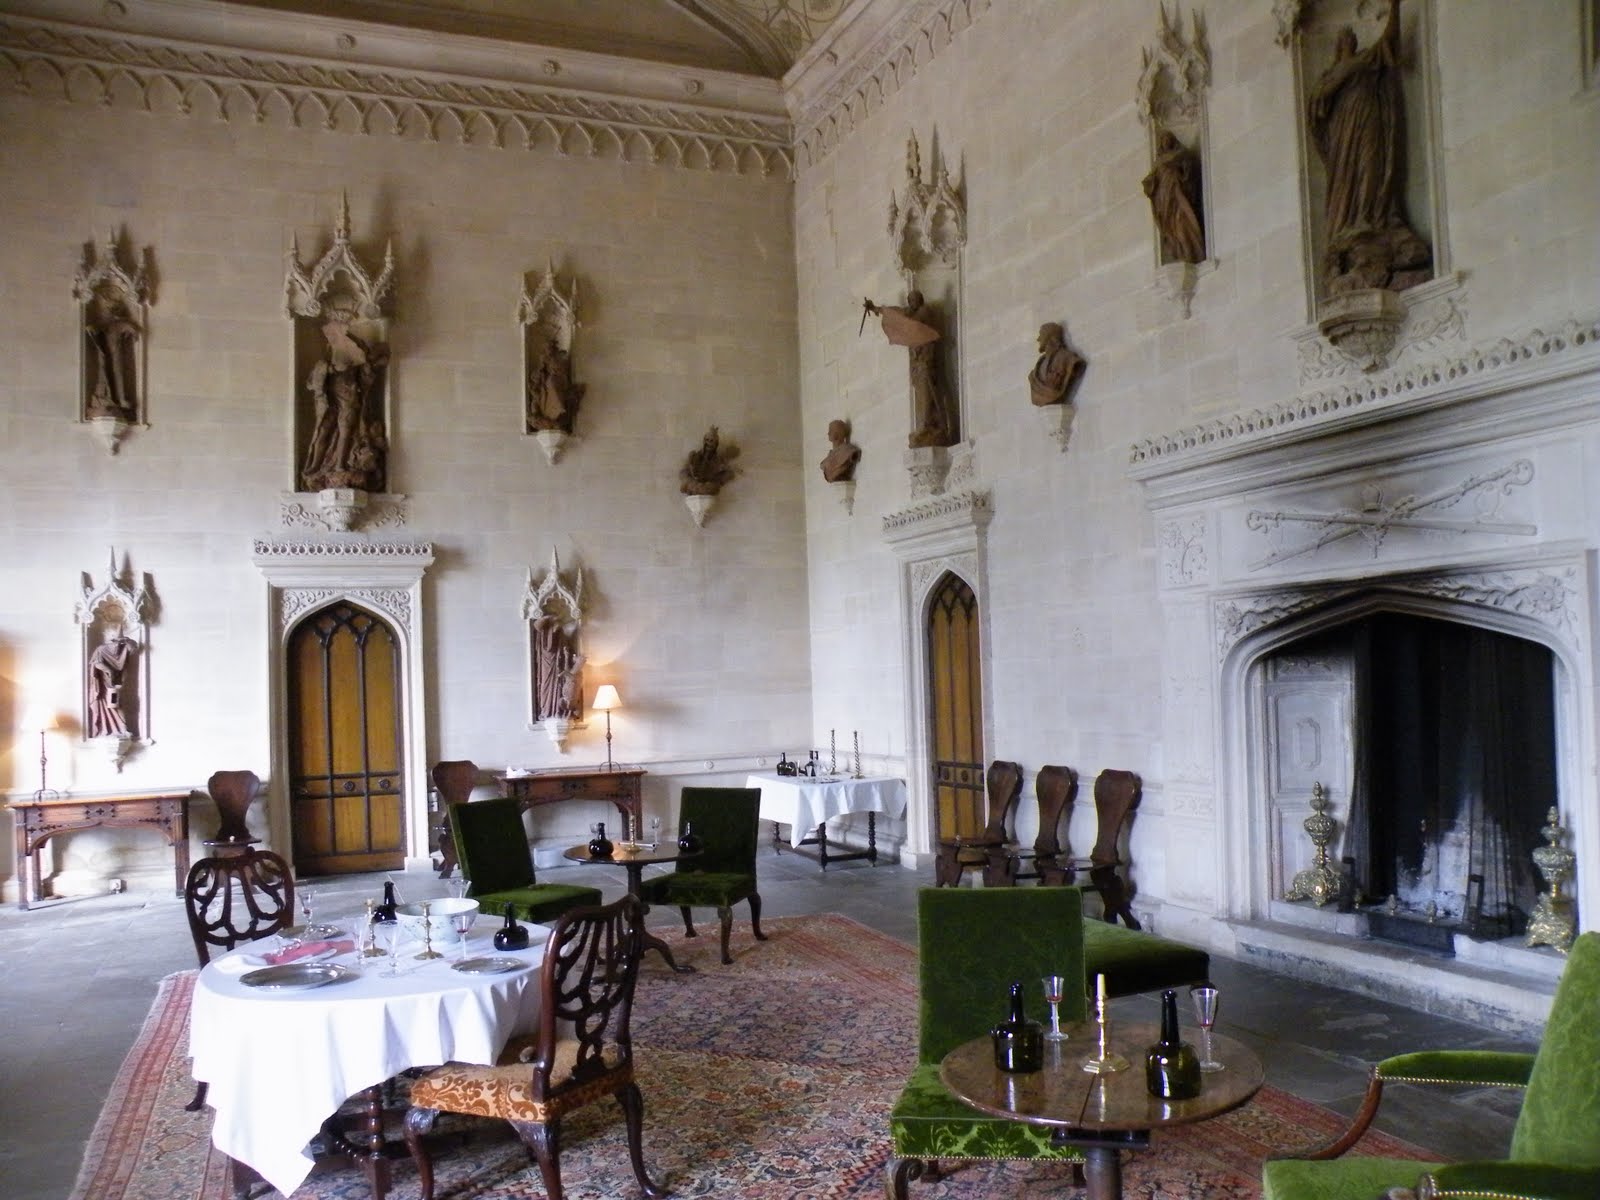 Share My Journey: A visit to Lacock Abbey, in the National Trust ...